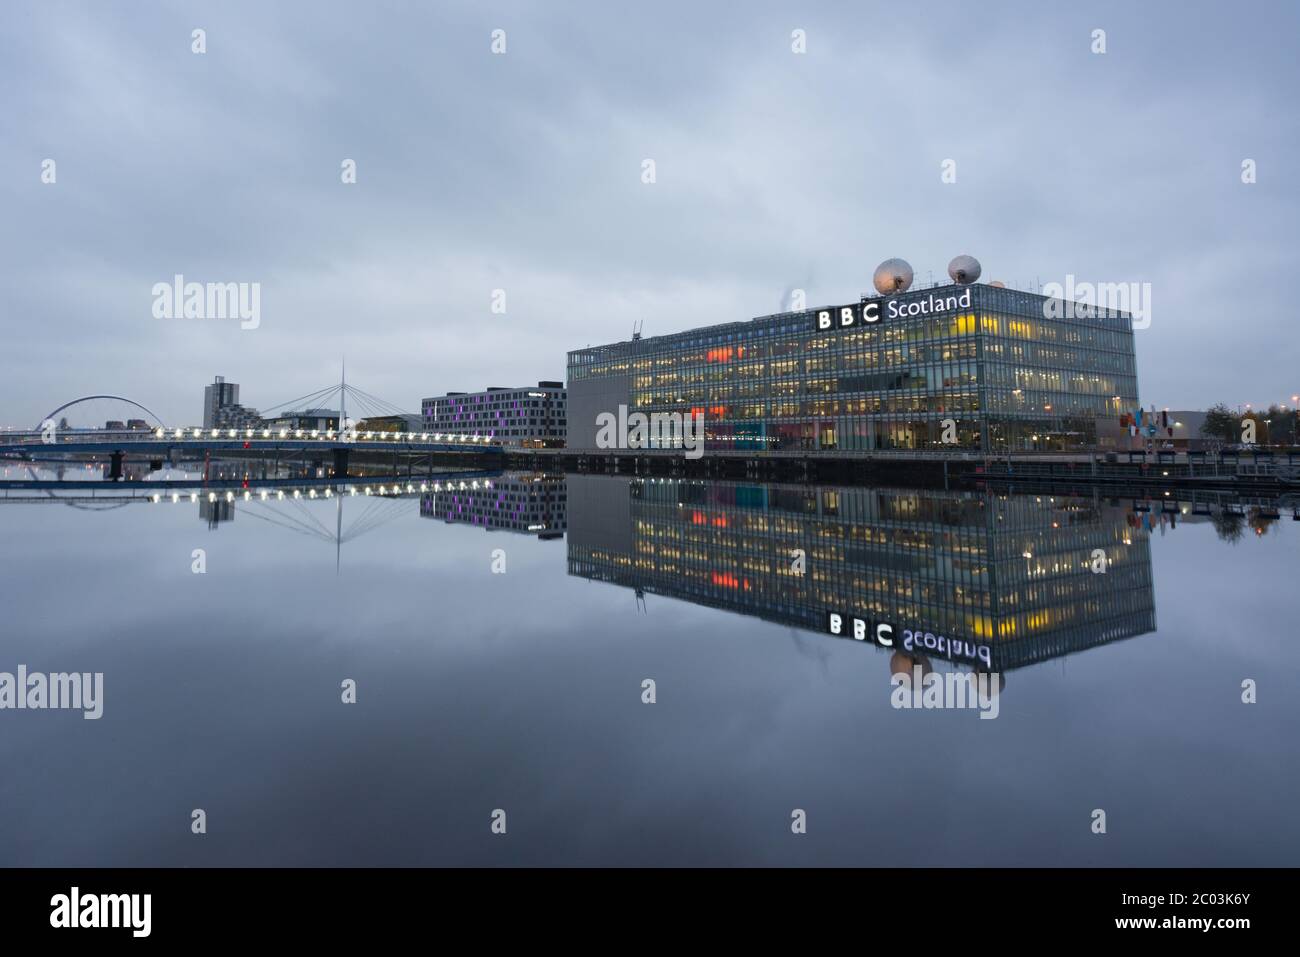 The BBC Scotland building reflected in the River Clyde in Glasgow, Scotland Stock Photo